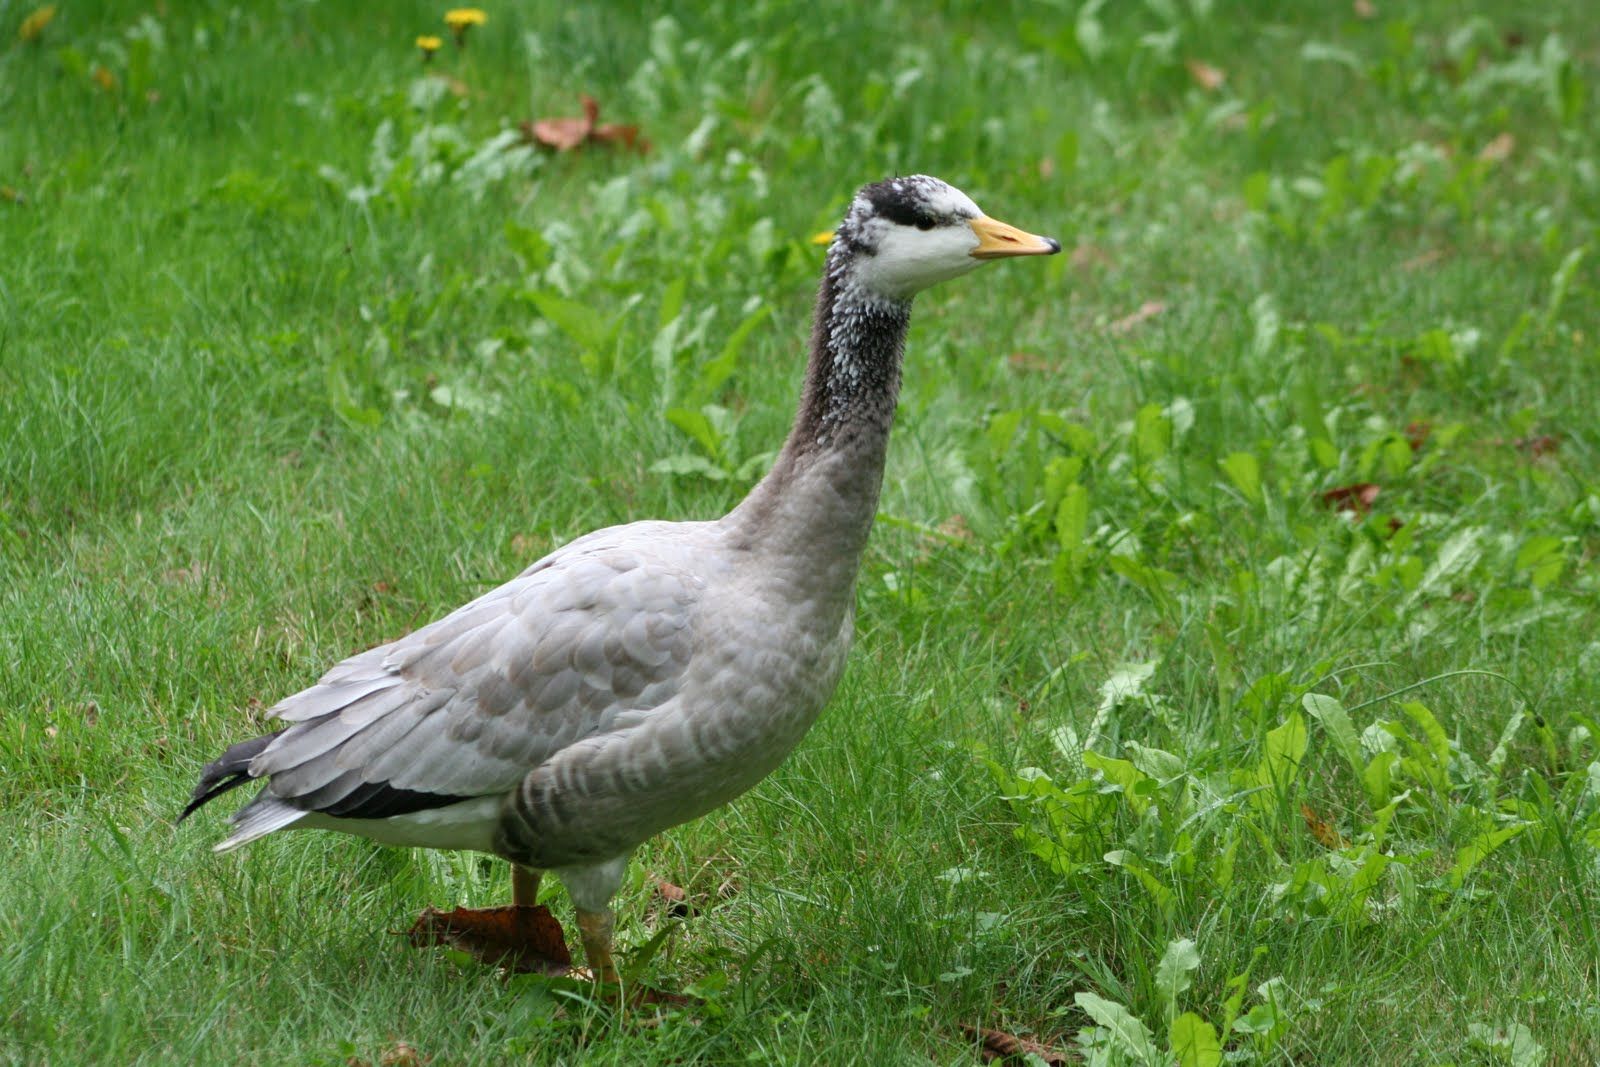 Bar-headed geese are named for two stripes appearing across the head of adult birds.